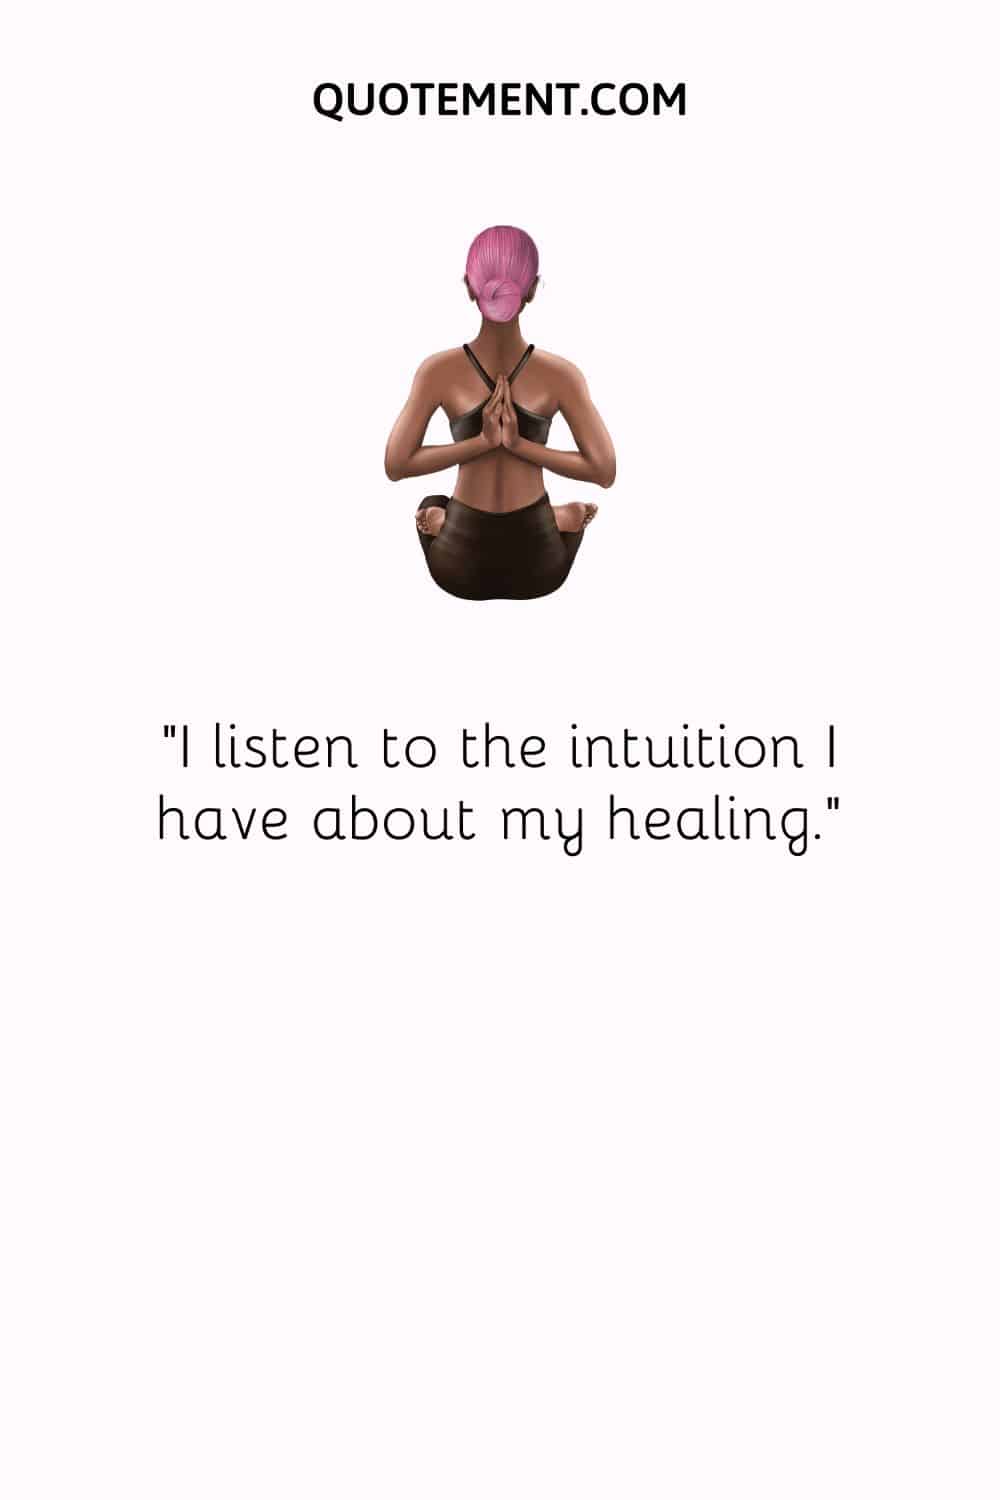 I listen to the intuition I have about my healing